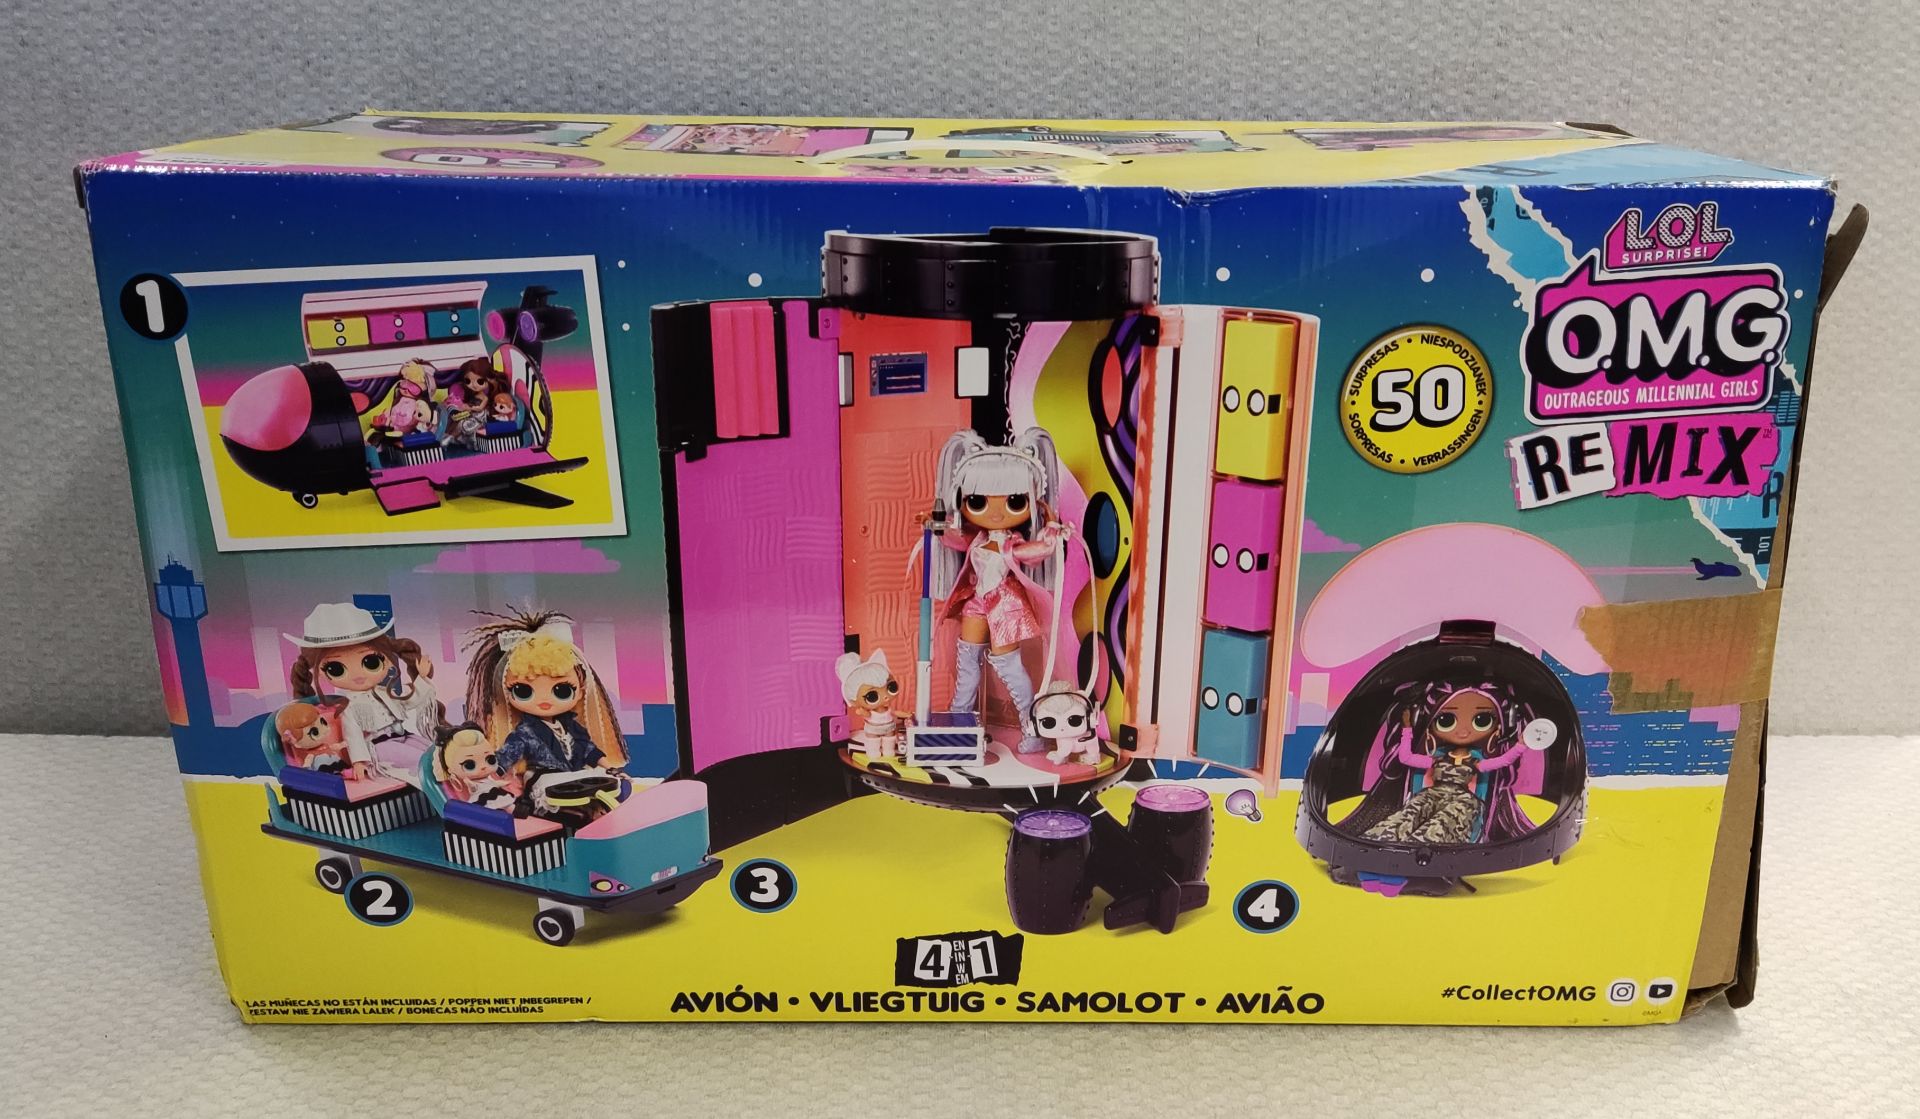 1 x LOL Surprise OMG Remix 4 in 1 Plane Playset - New/Boxed - Image 4 of 7